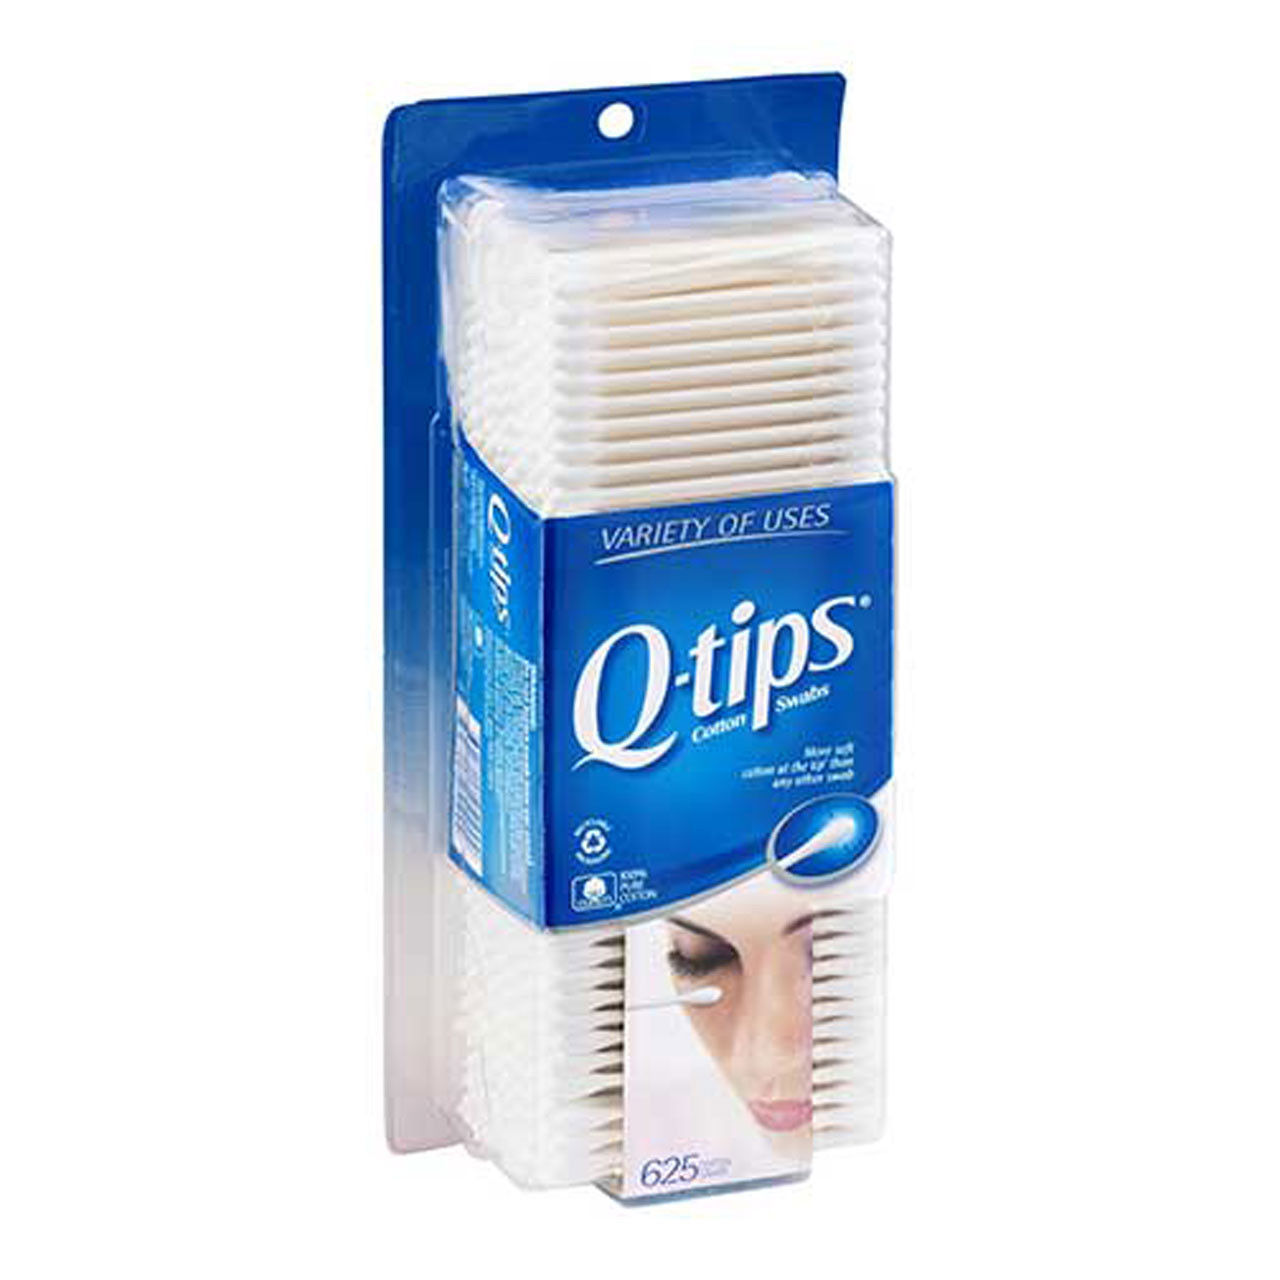 Does the bulk cotton swabs packaging detail mention 100% Cotton Swab Q-Tips?